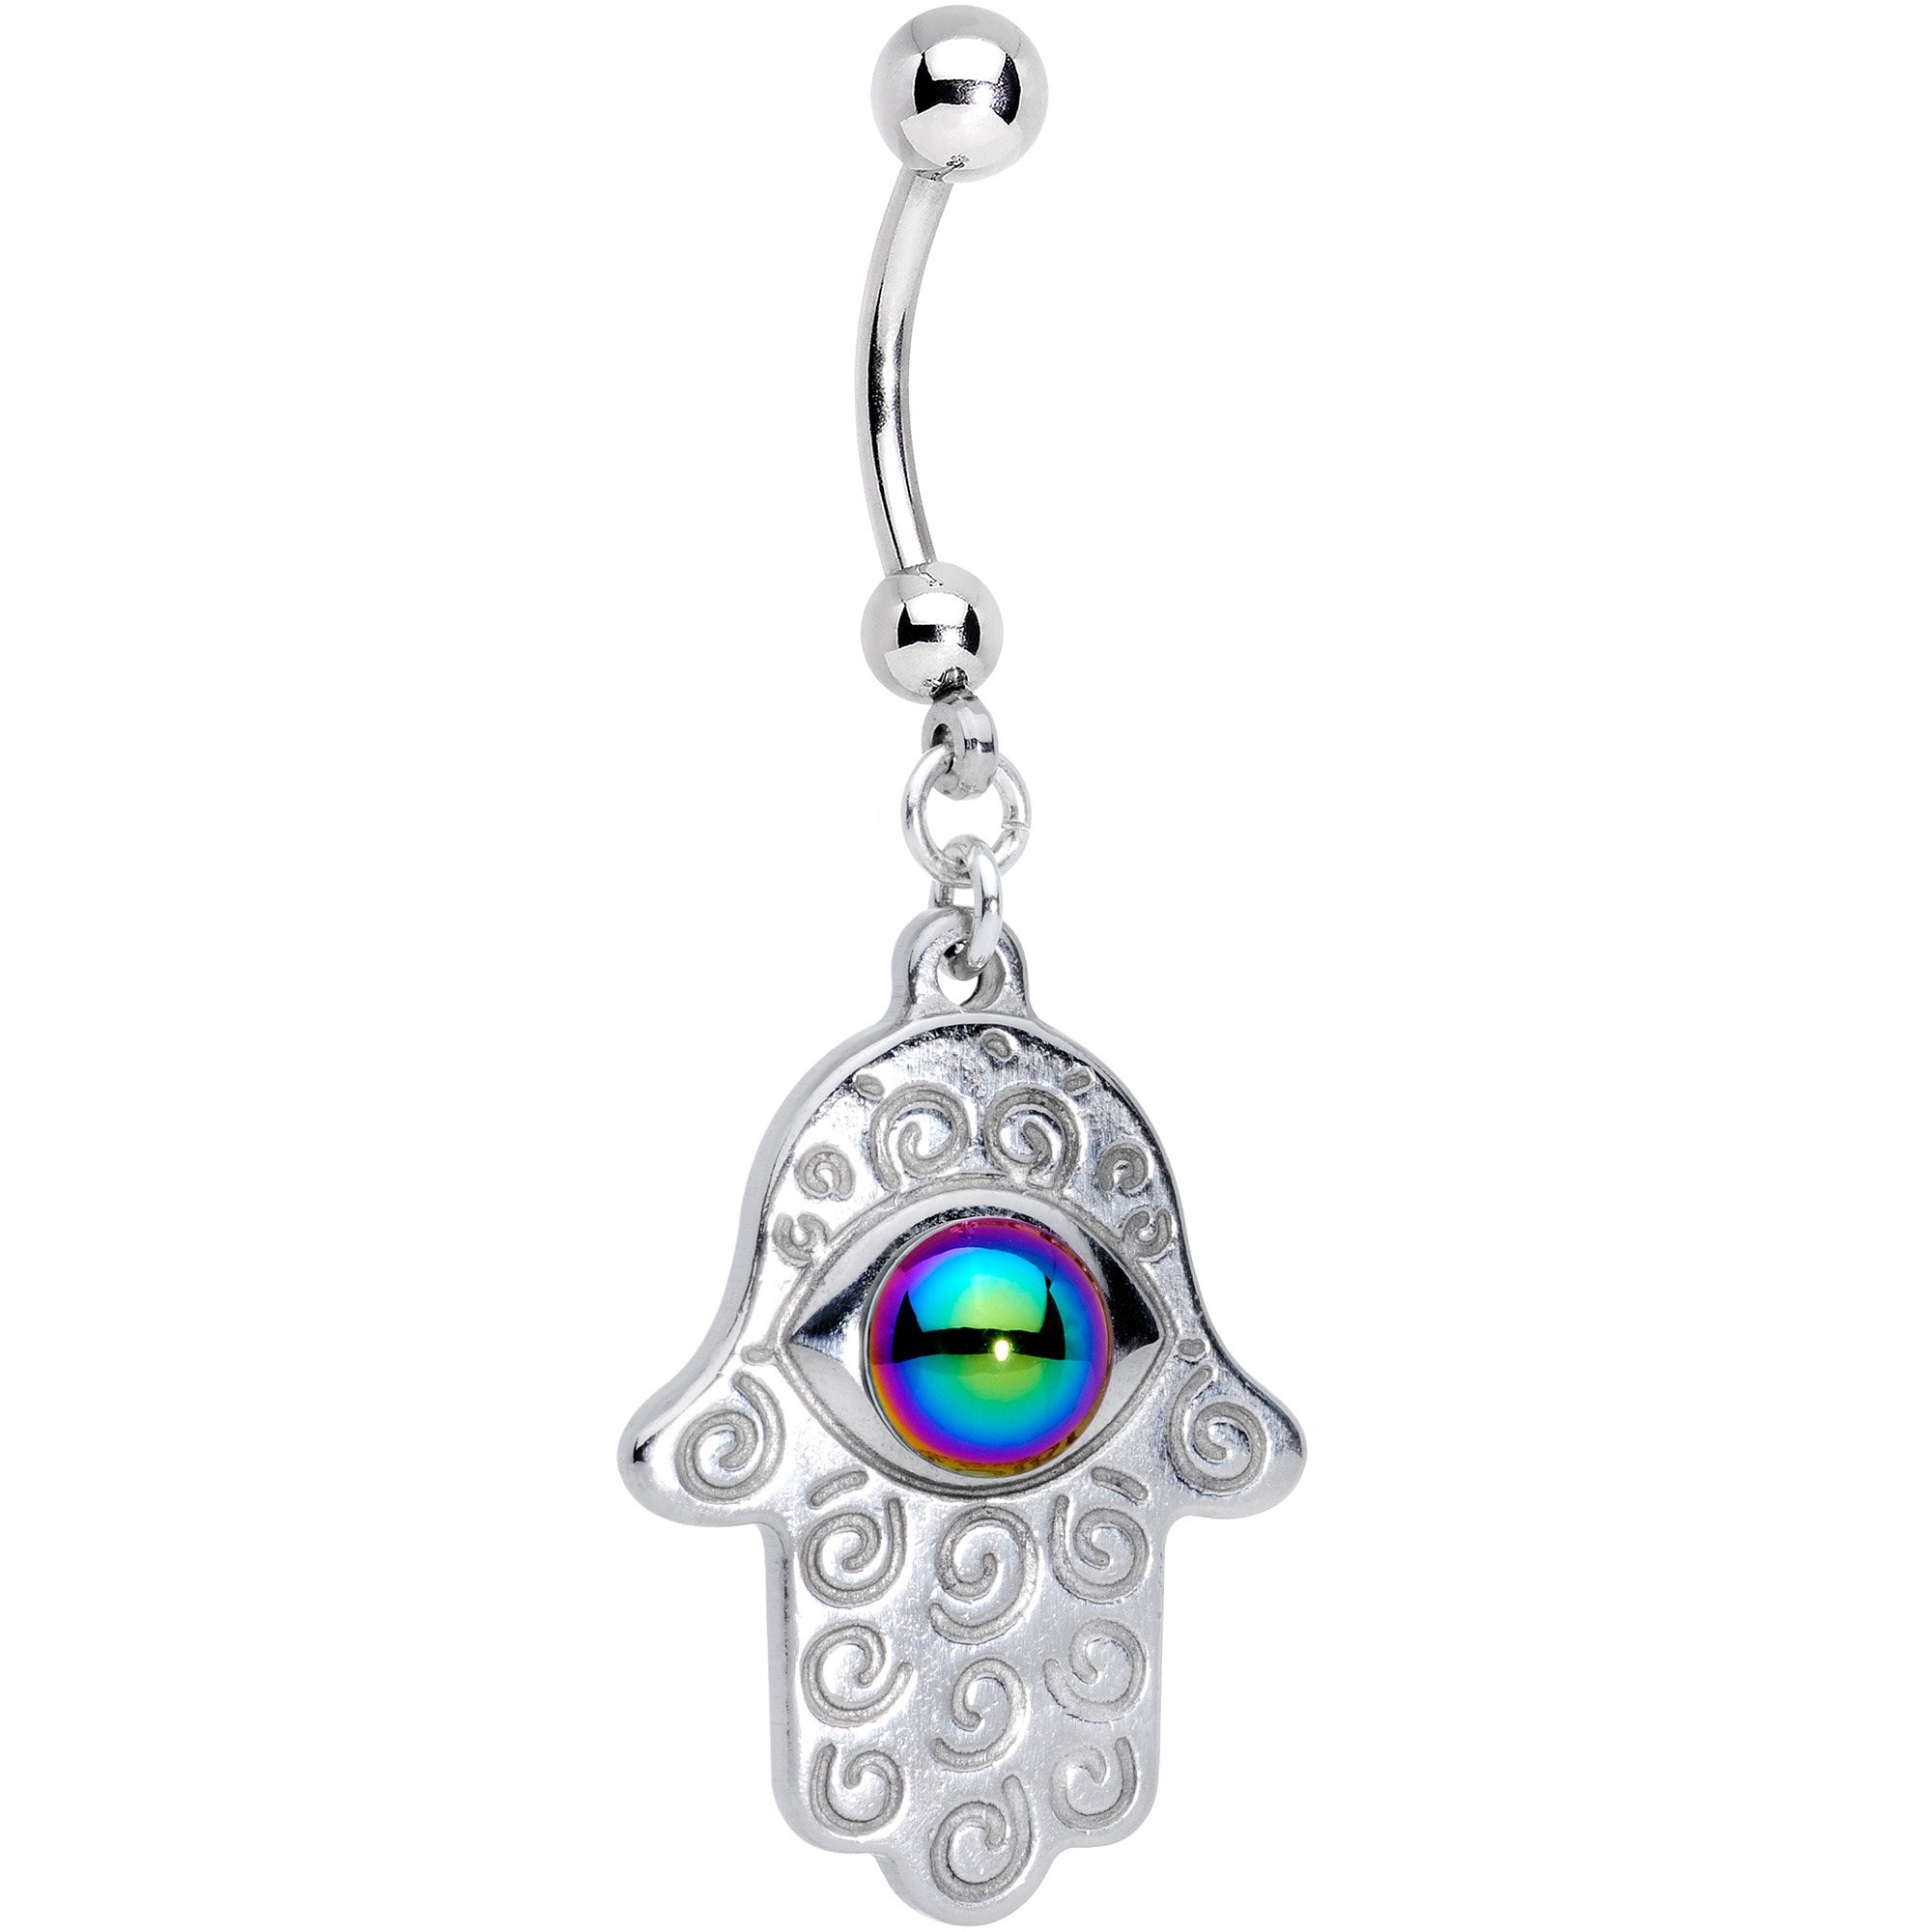 Handmade Hamsa Hand Dangle Belly Ring Created with Crystals